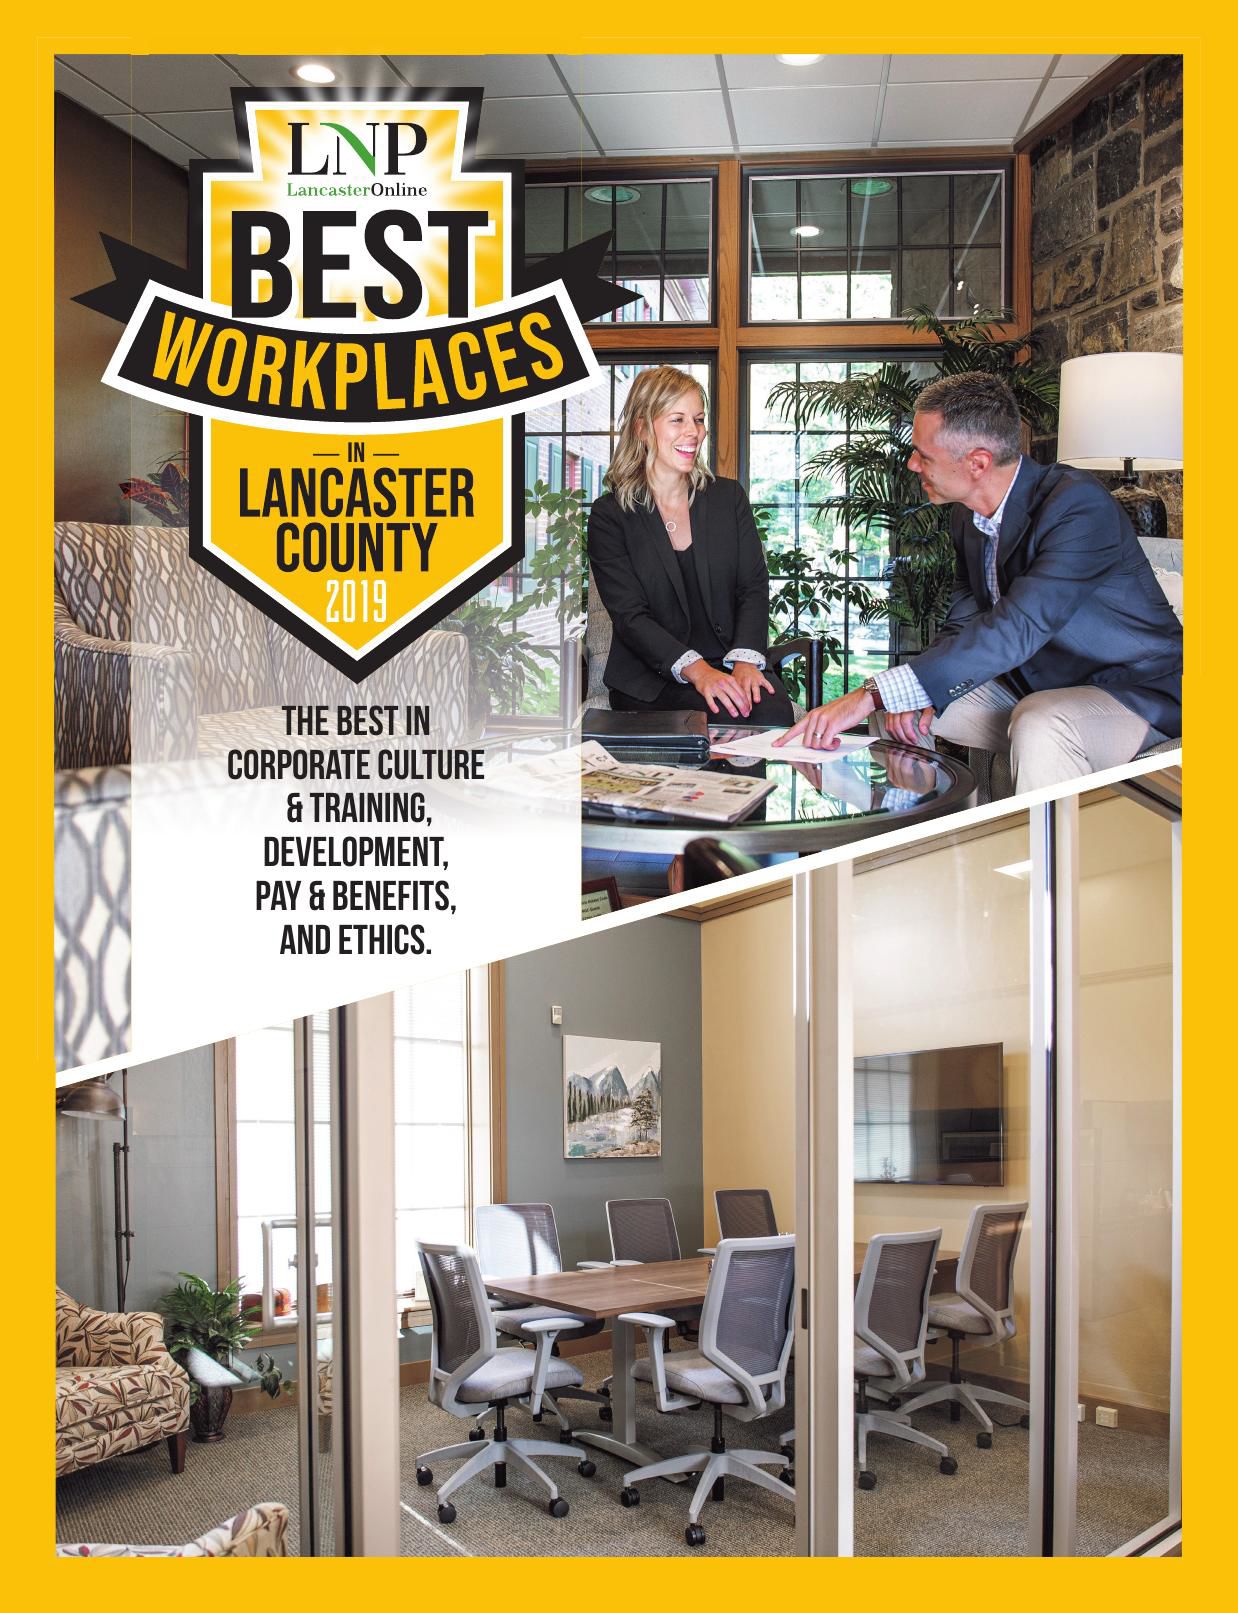 Best Workplaces in Lancaster County 2019